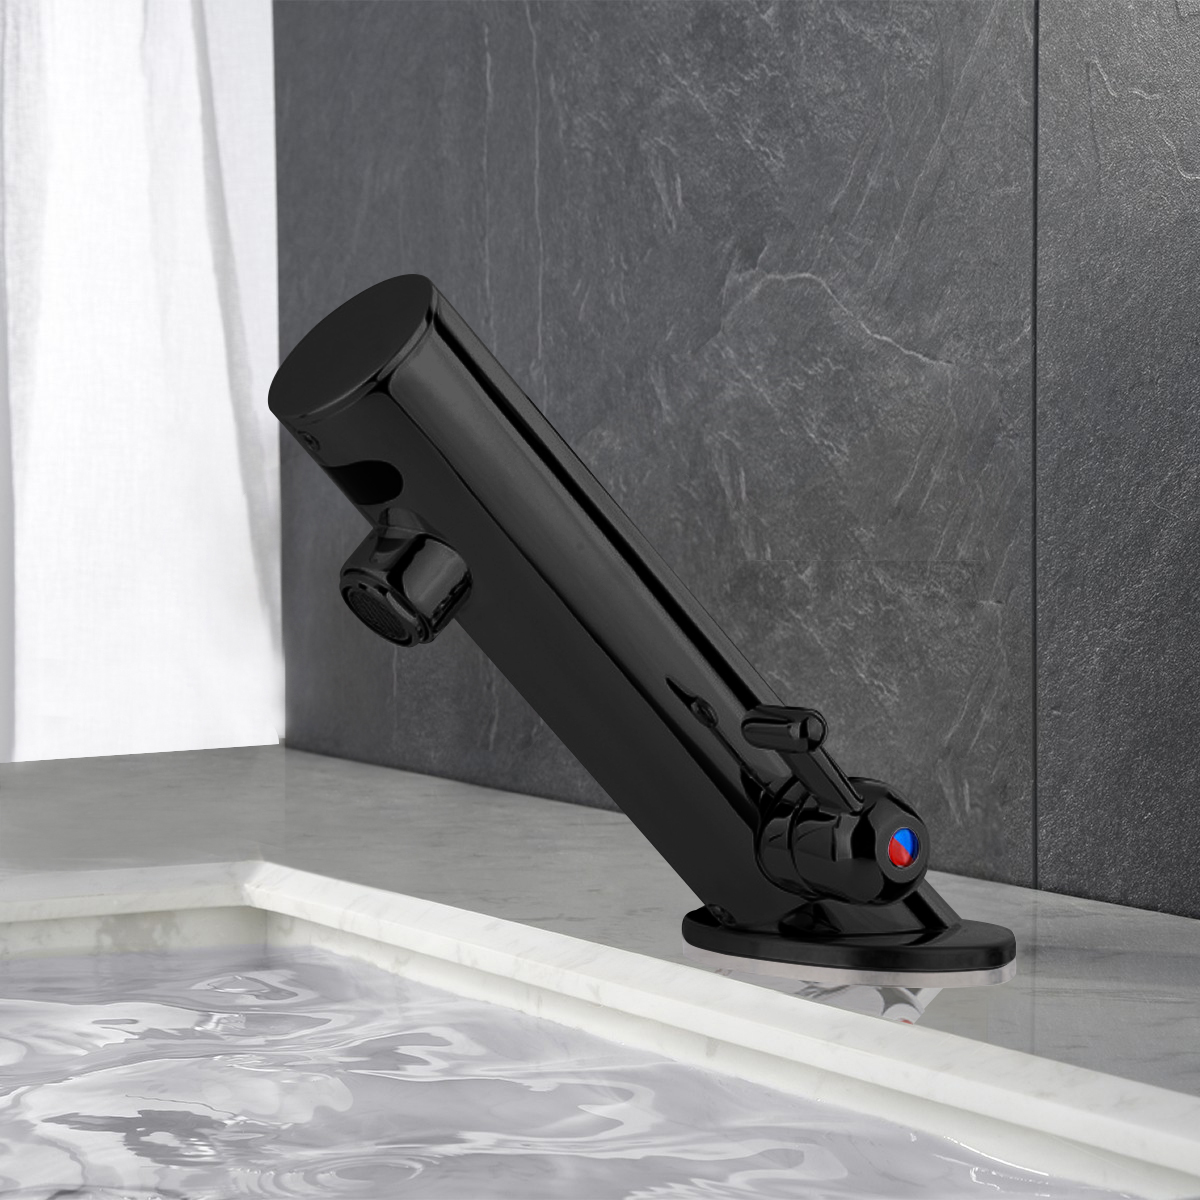 Leo All-In-One Thermostatic Commercial Automatic Sensor Faucet Dark Oil Rubbed Bronze Finish